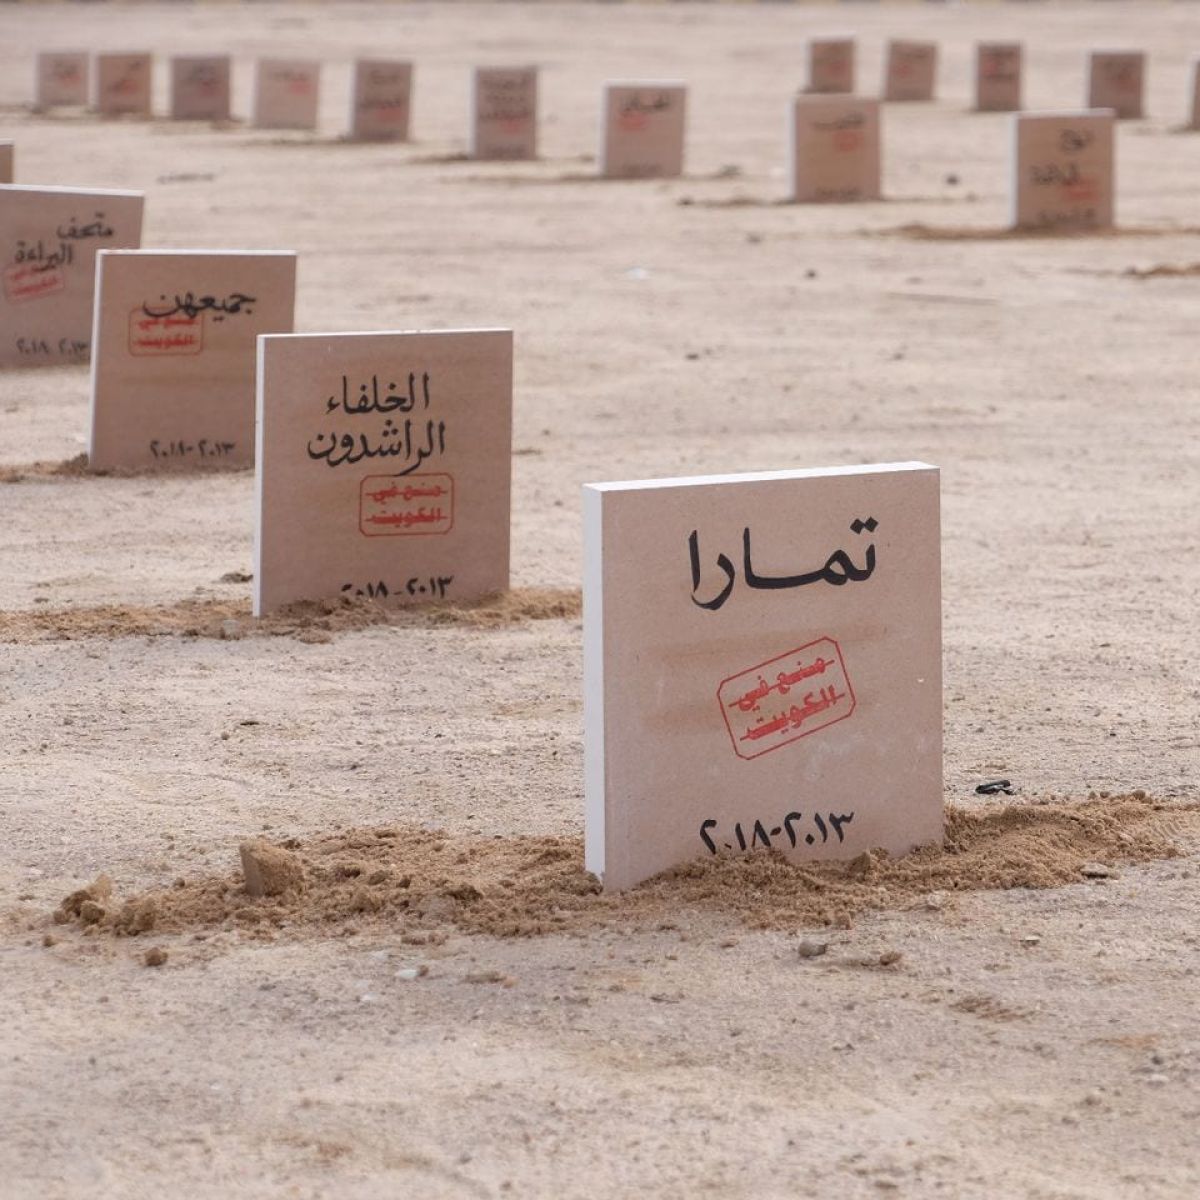 The Cemetery of banned Books: Censorship in Kuwait